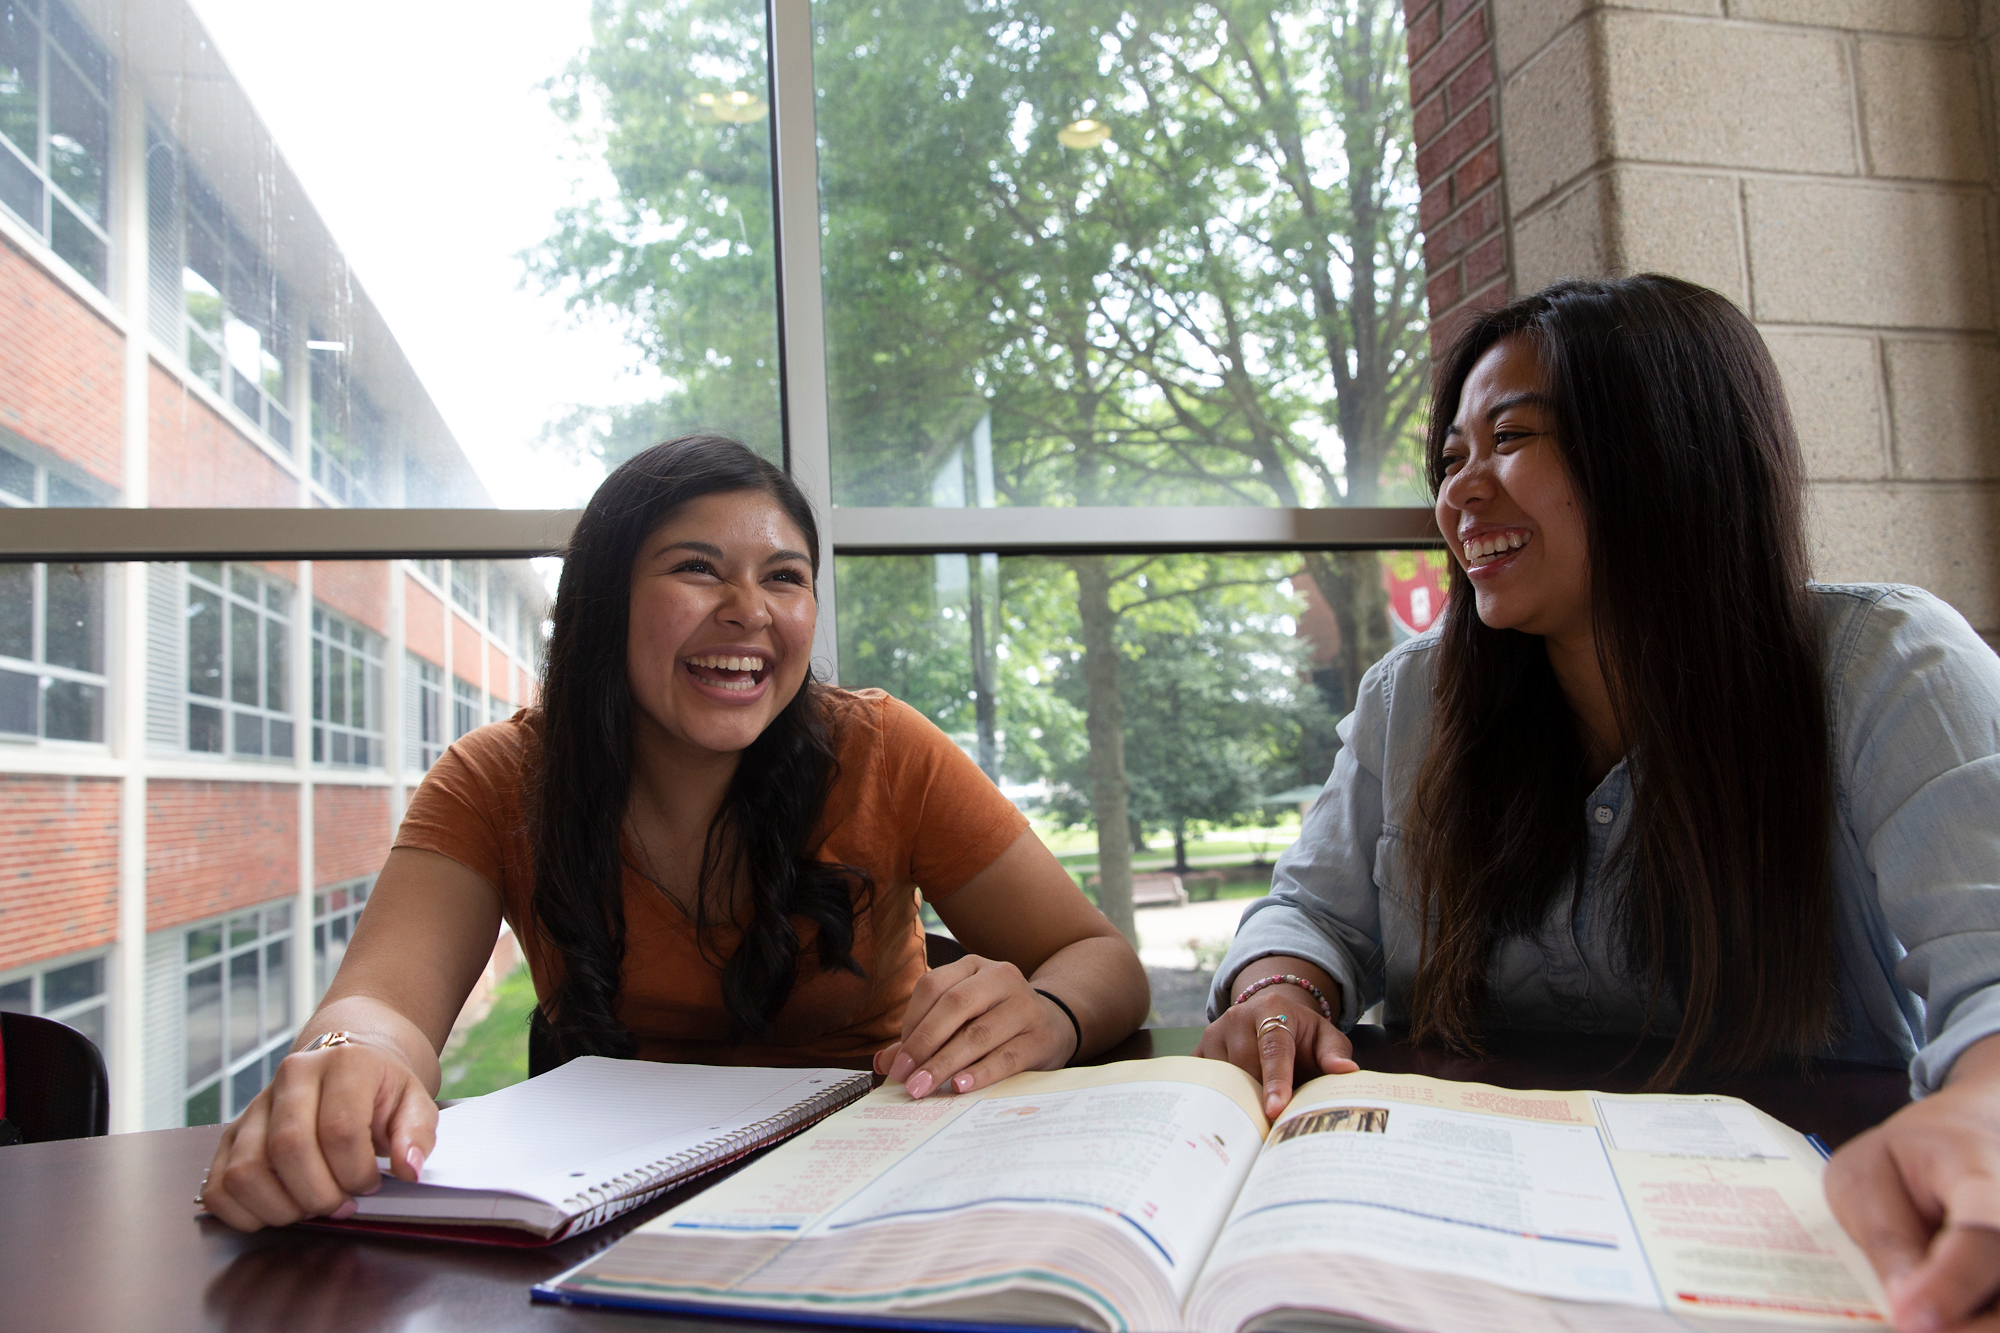 Students laugh together while studying